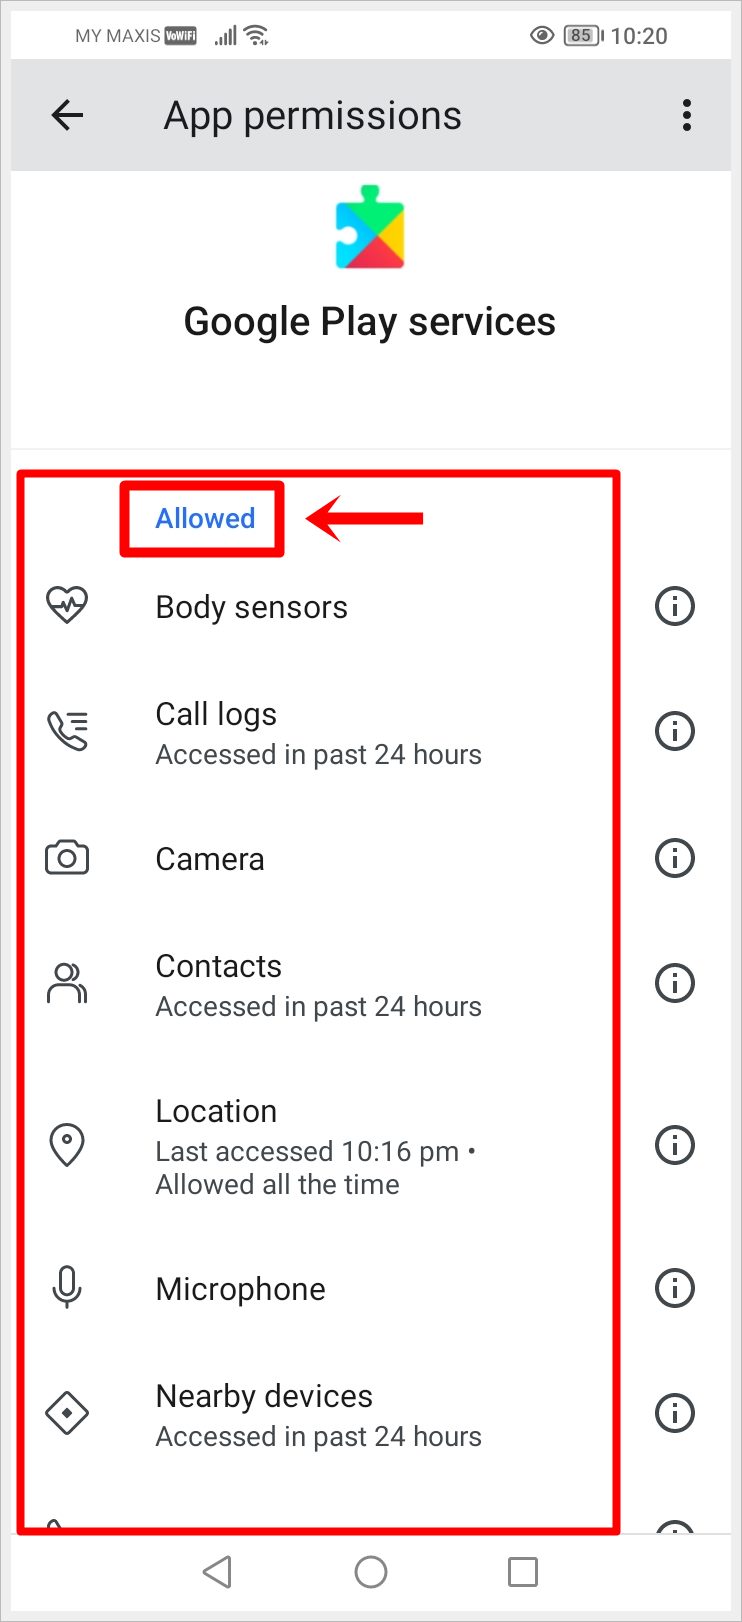 How to Fix "Google Play Services Keeps Stopping" Error: This image shows the Google Play Services App permissions page. The permissions allowed are highlighted.